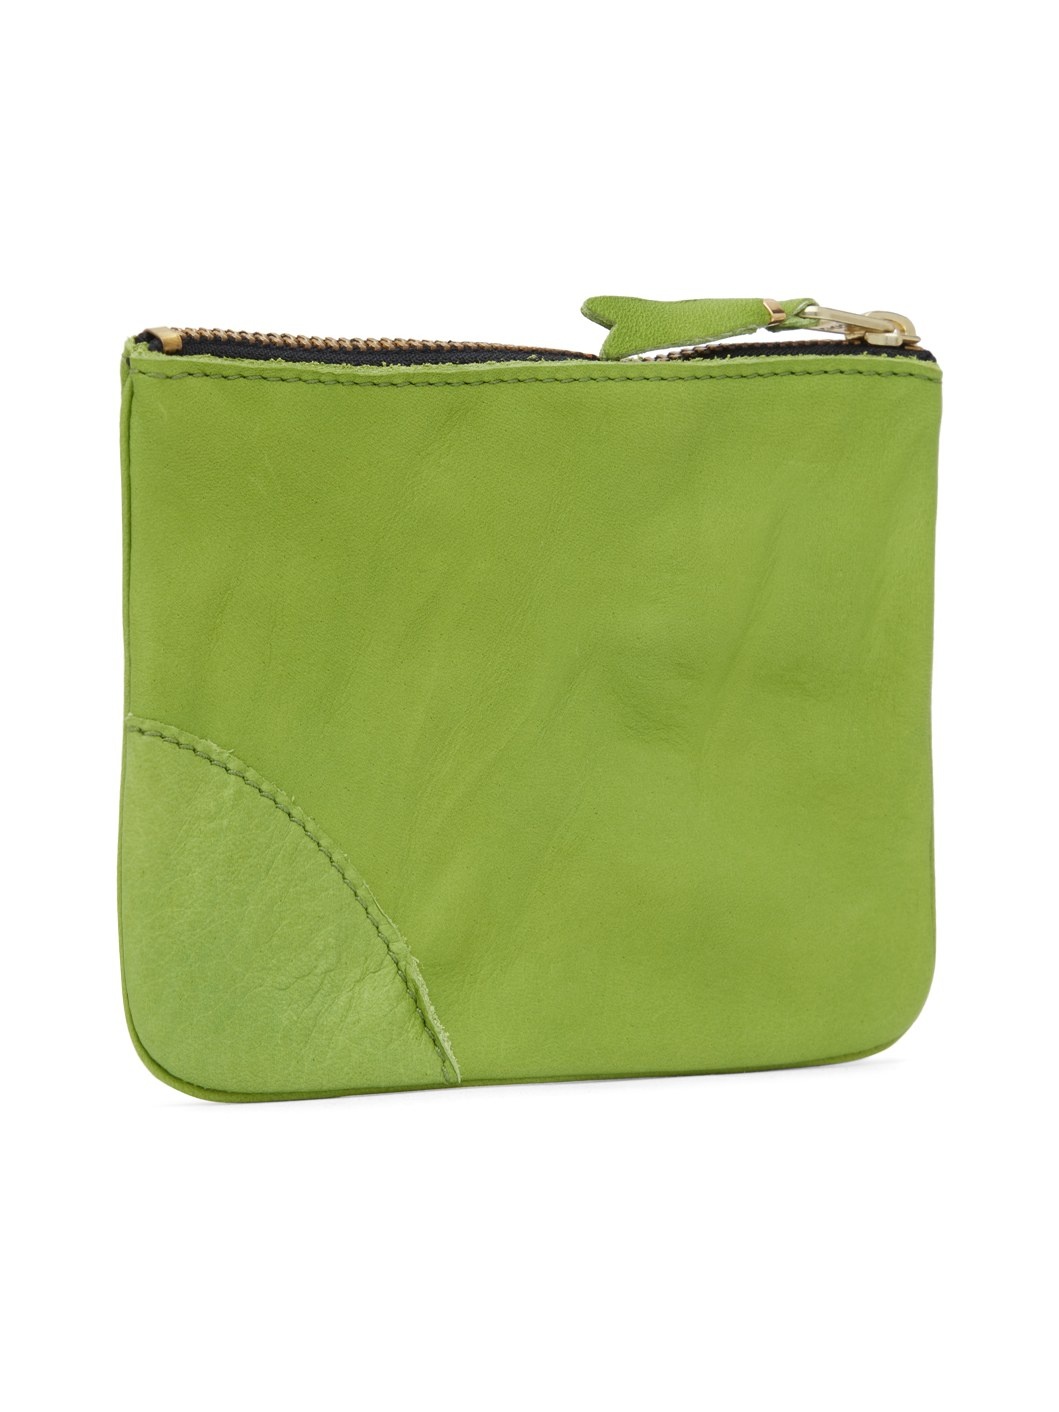 Green Washed Pouch - 3